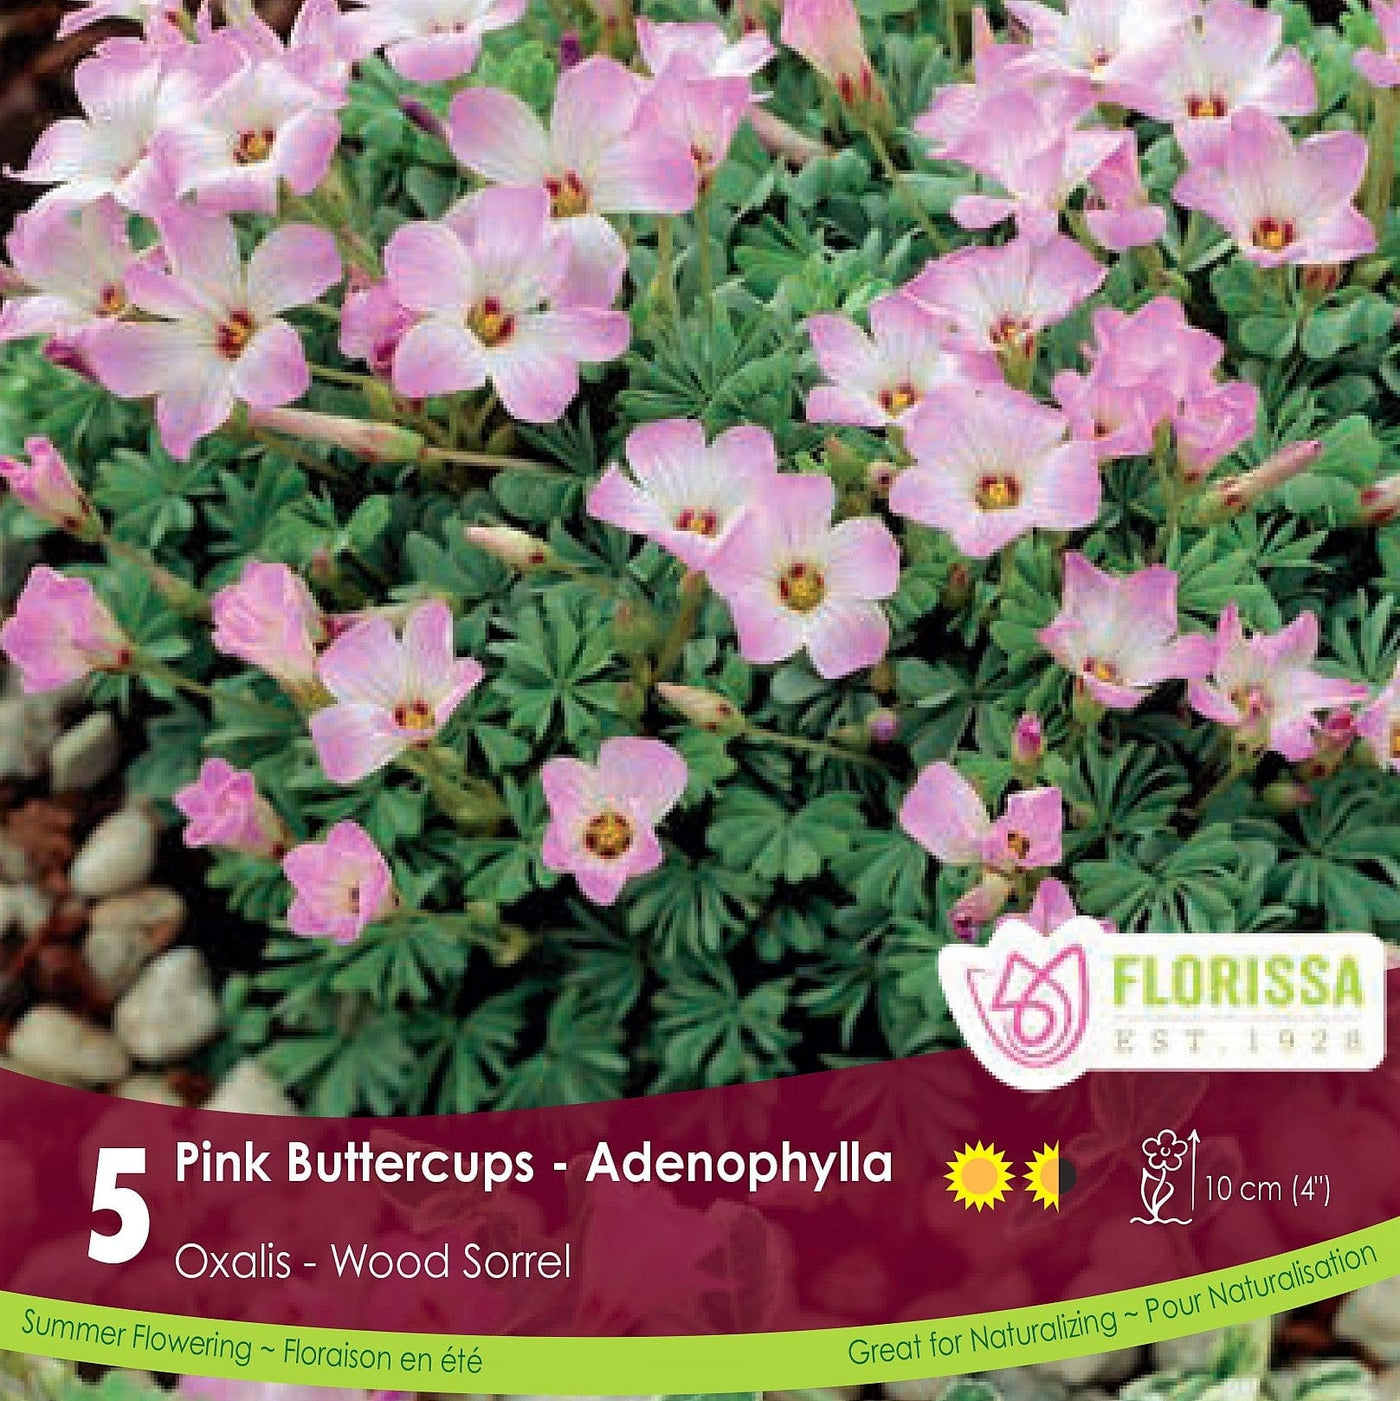 Oxalis - Pink Buttercups - Adenophylla, 5 Pack